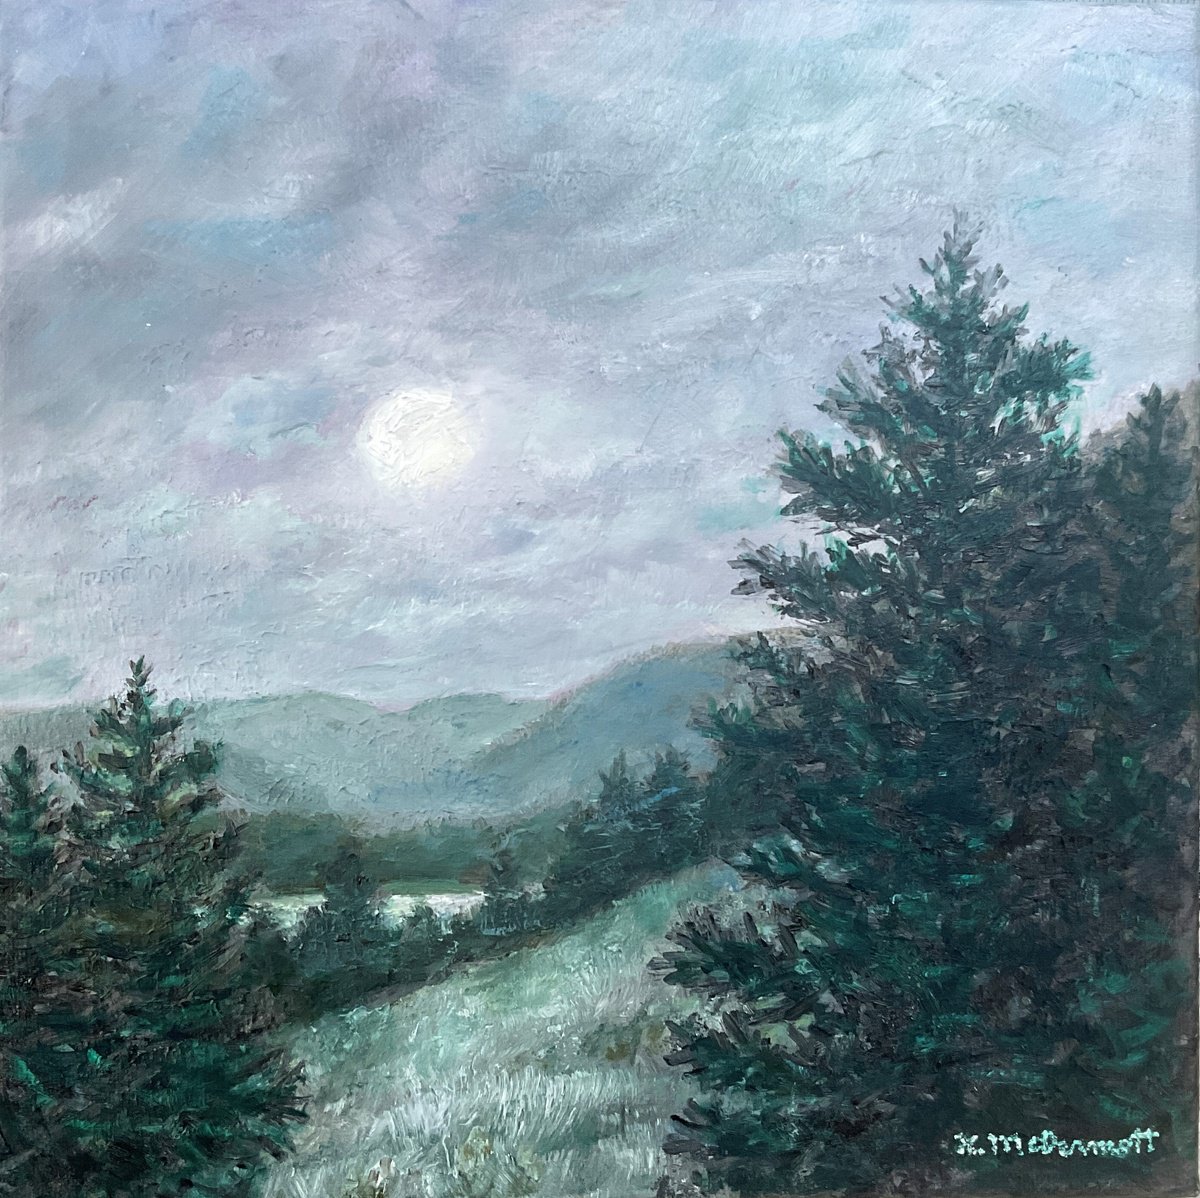 MOONLIT NIGHT - oil 12X12 inch stretched canvas by Kathleen McDermott